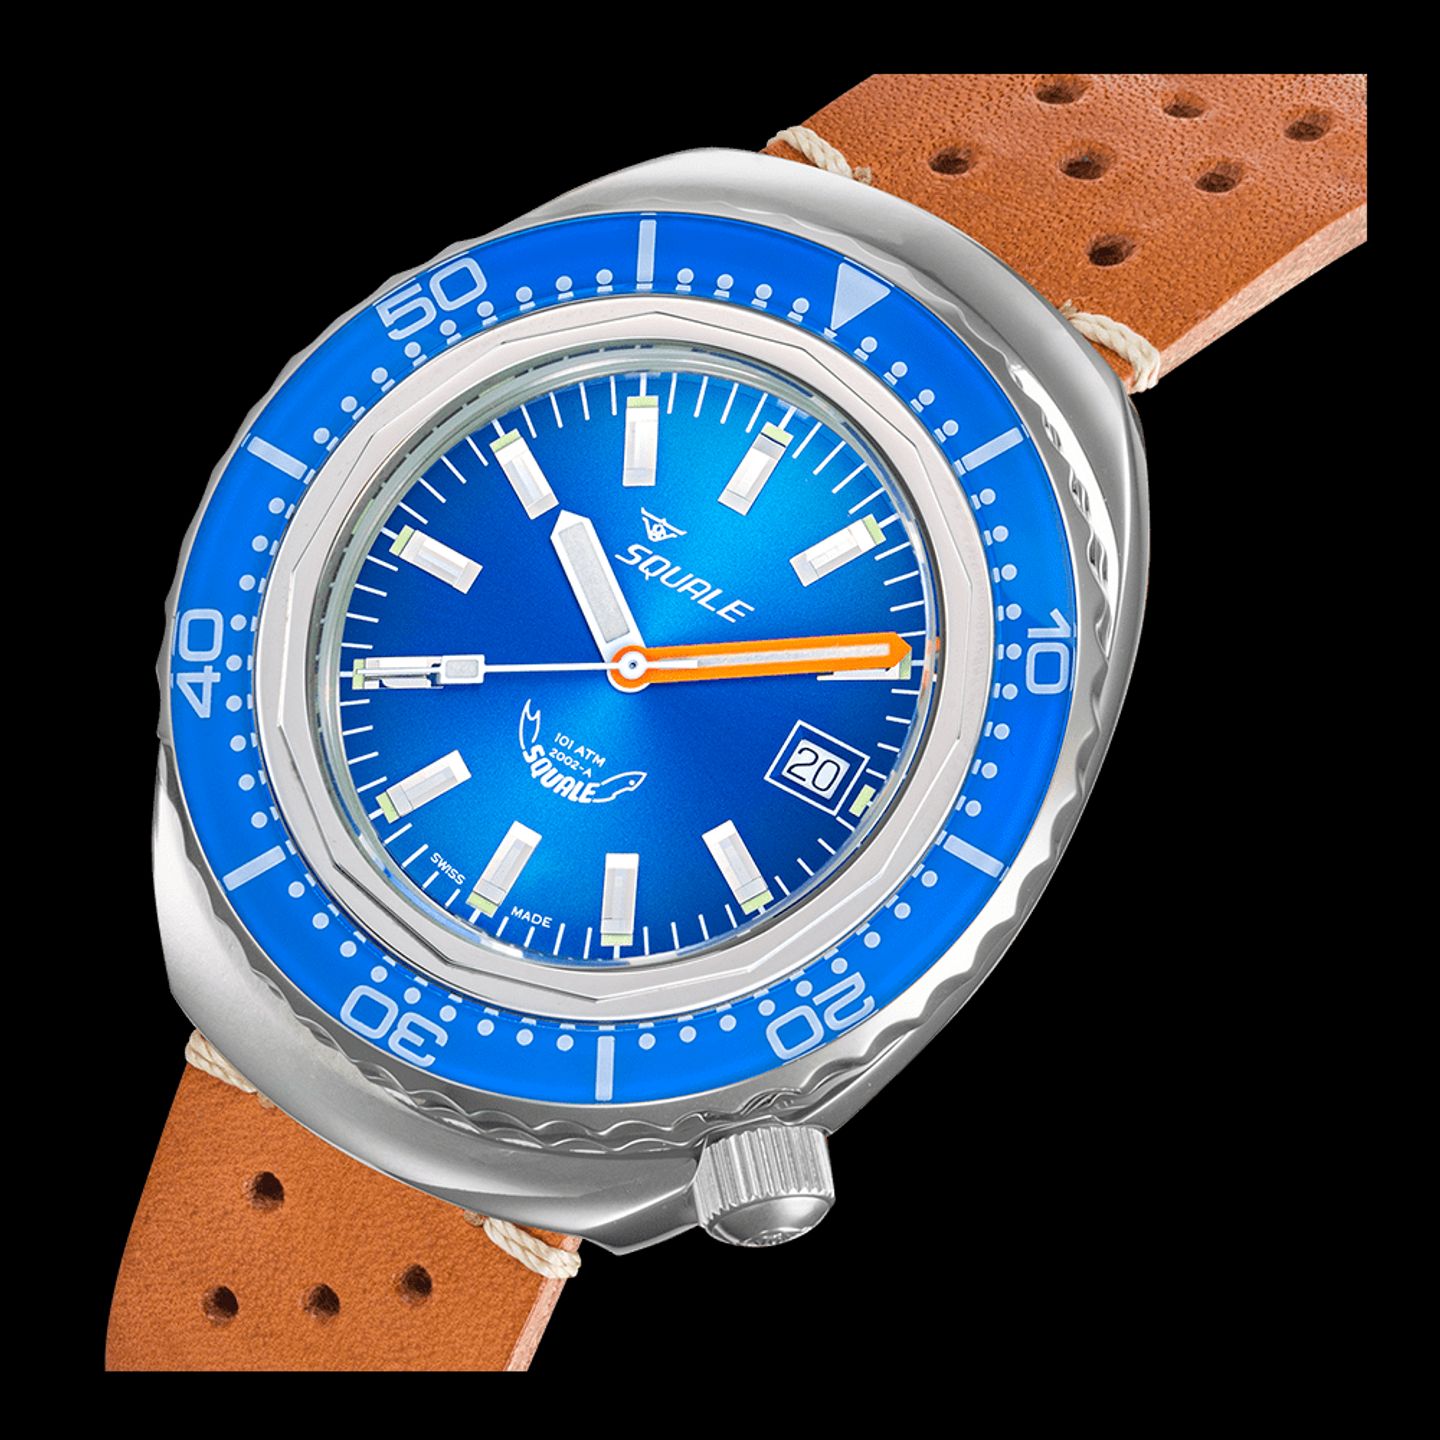 Squale 2002 2002 blue leather - (2/4)